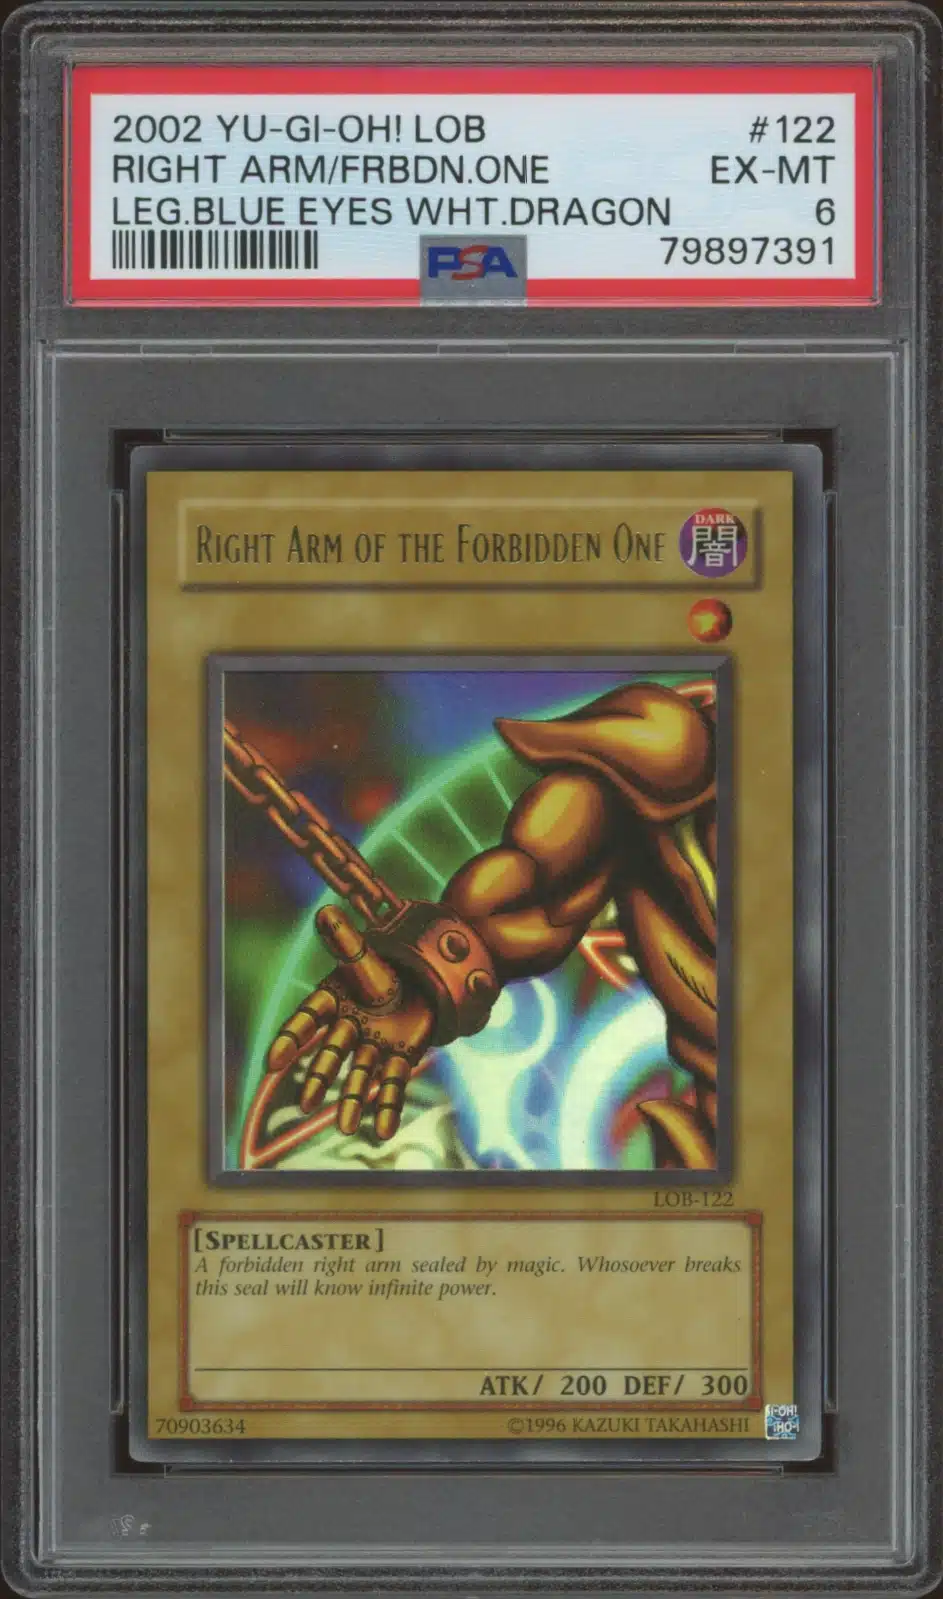 2002 Yu-Gi-Oh! Legend of Blue Eyes White Dragon Right Arm of the Forbidden One #LOB-122 (PSA 6) (Front)